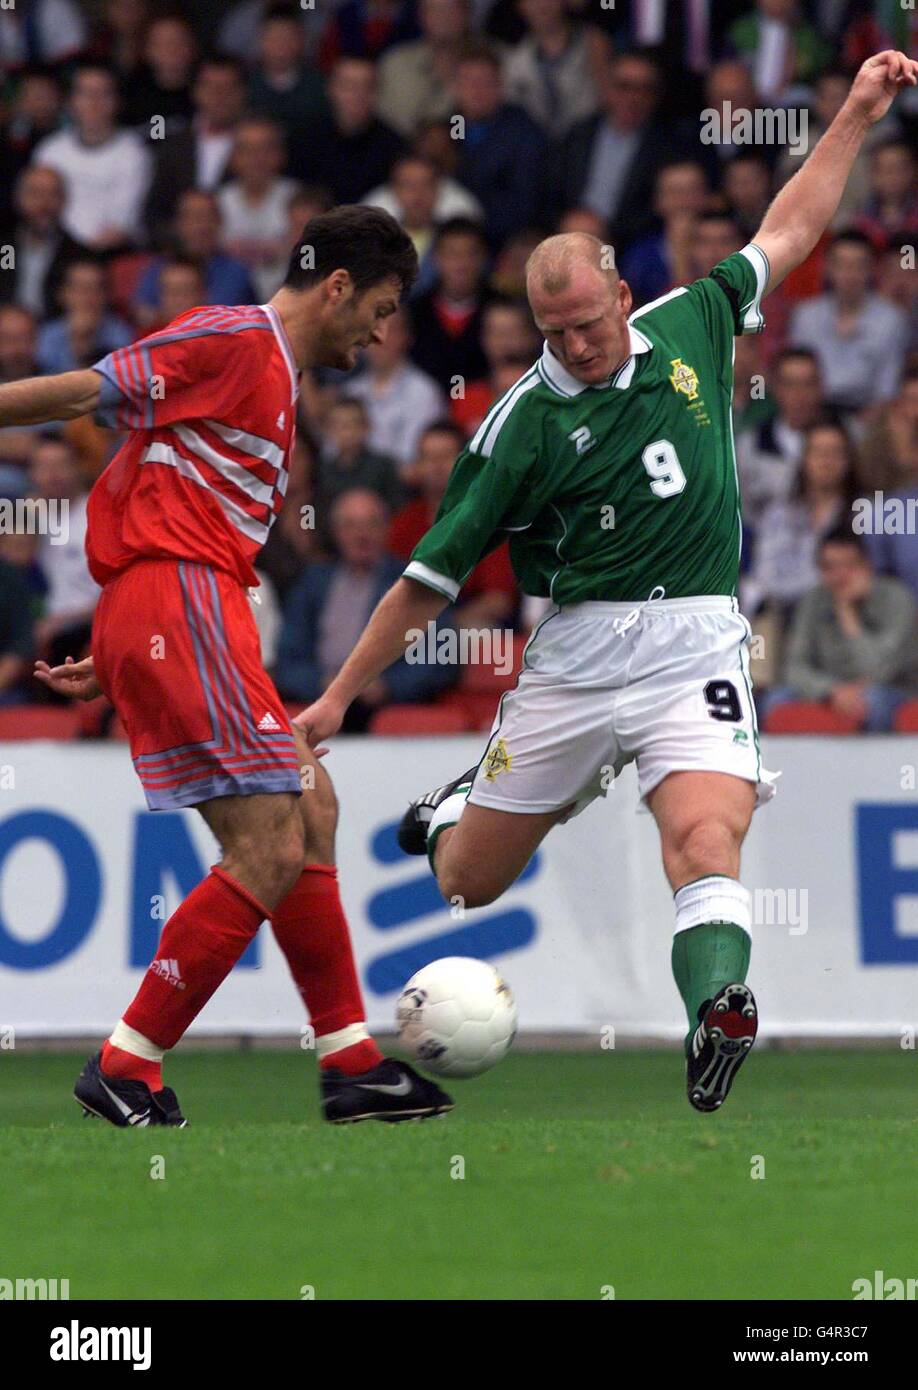 Northern Ireland's Ian Dowie (right) beats Turkey's Temizkanoglu for a missed opportunity in the opening minutes of the Northern Ireland v Turkey Euro 2000 qualifier football match at Windsor Park, Belfast. Stock Photo